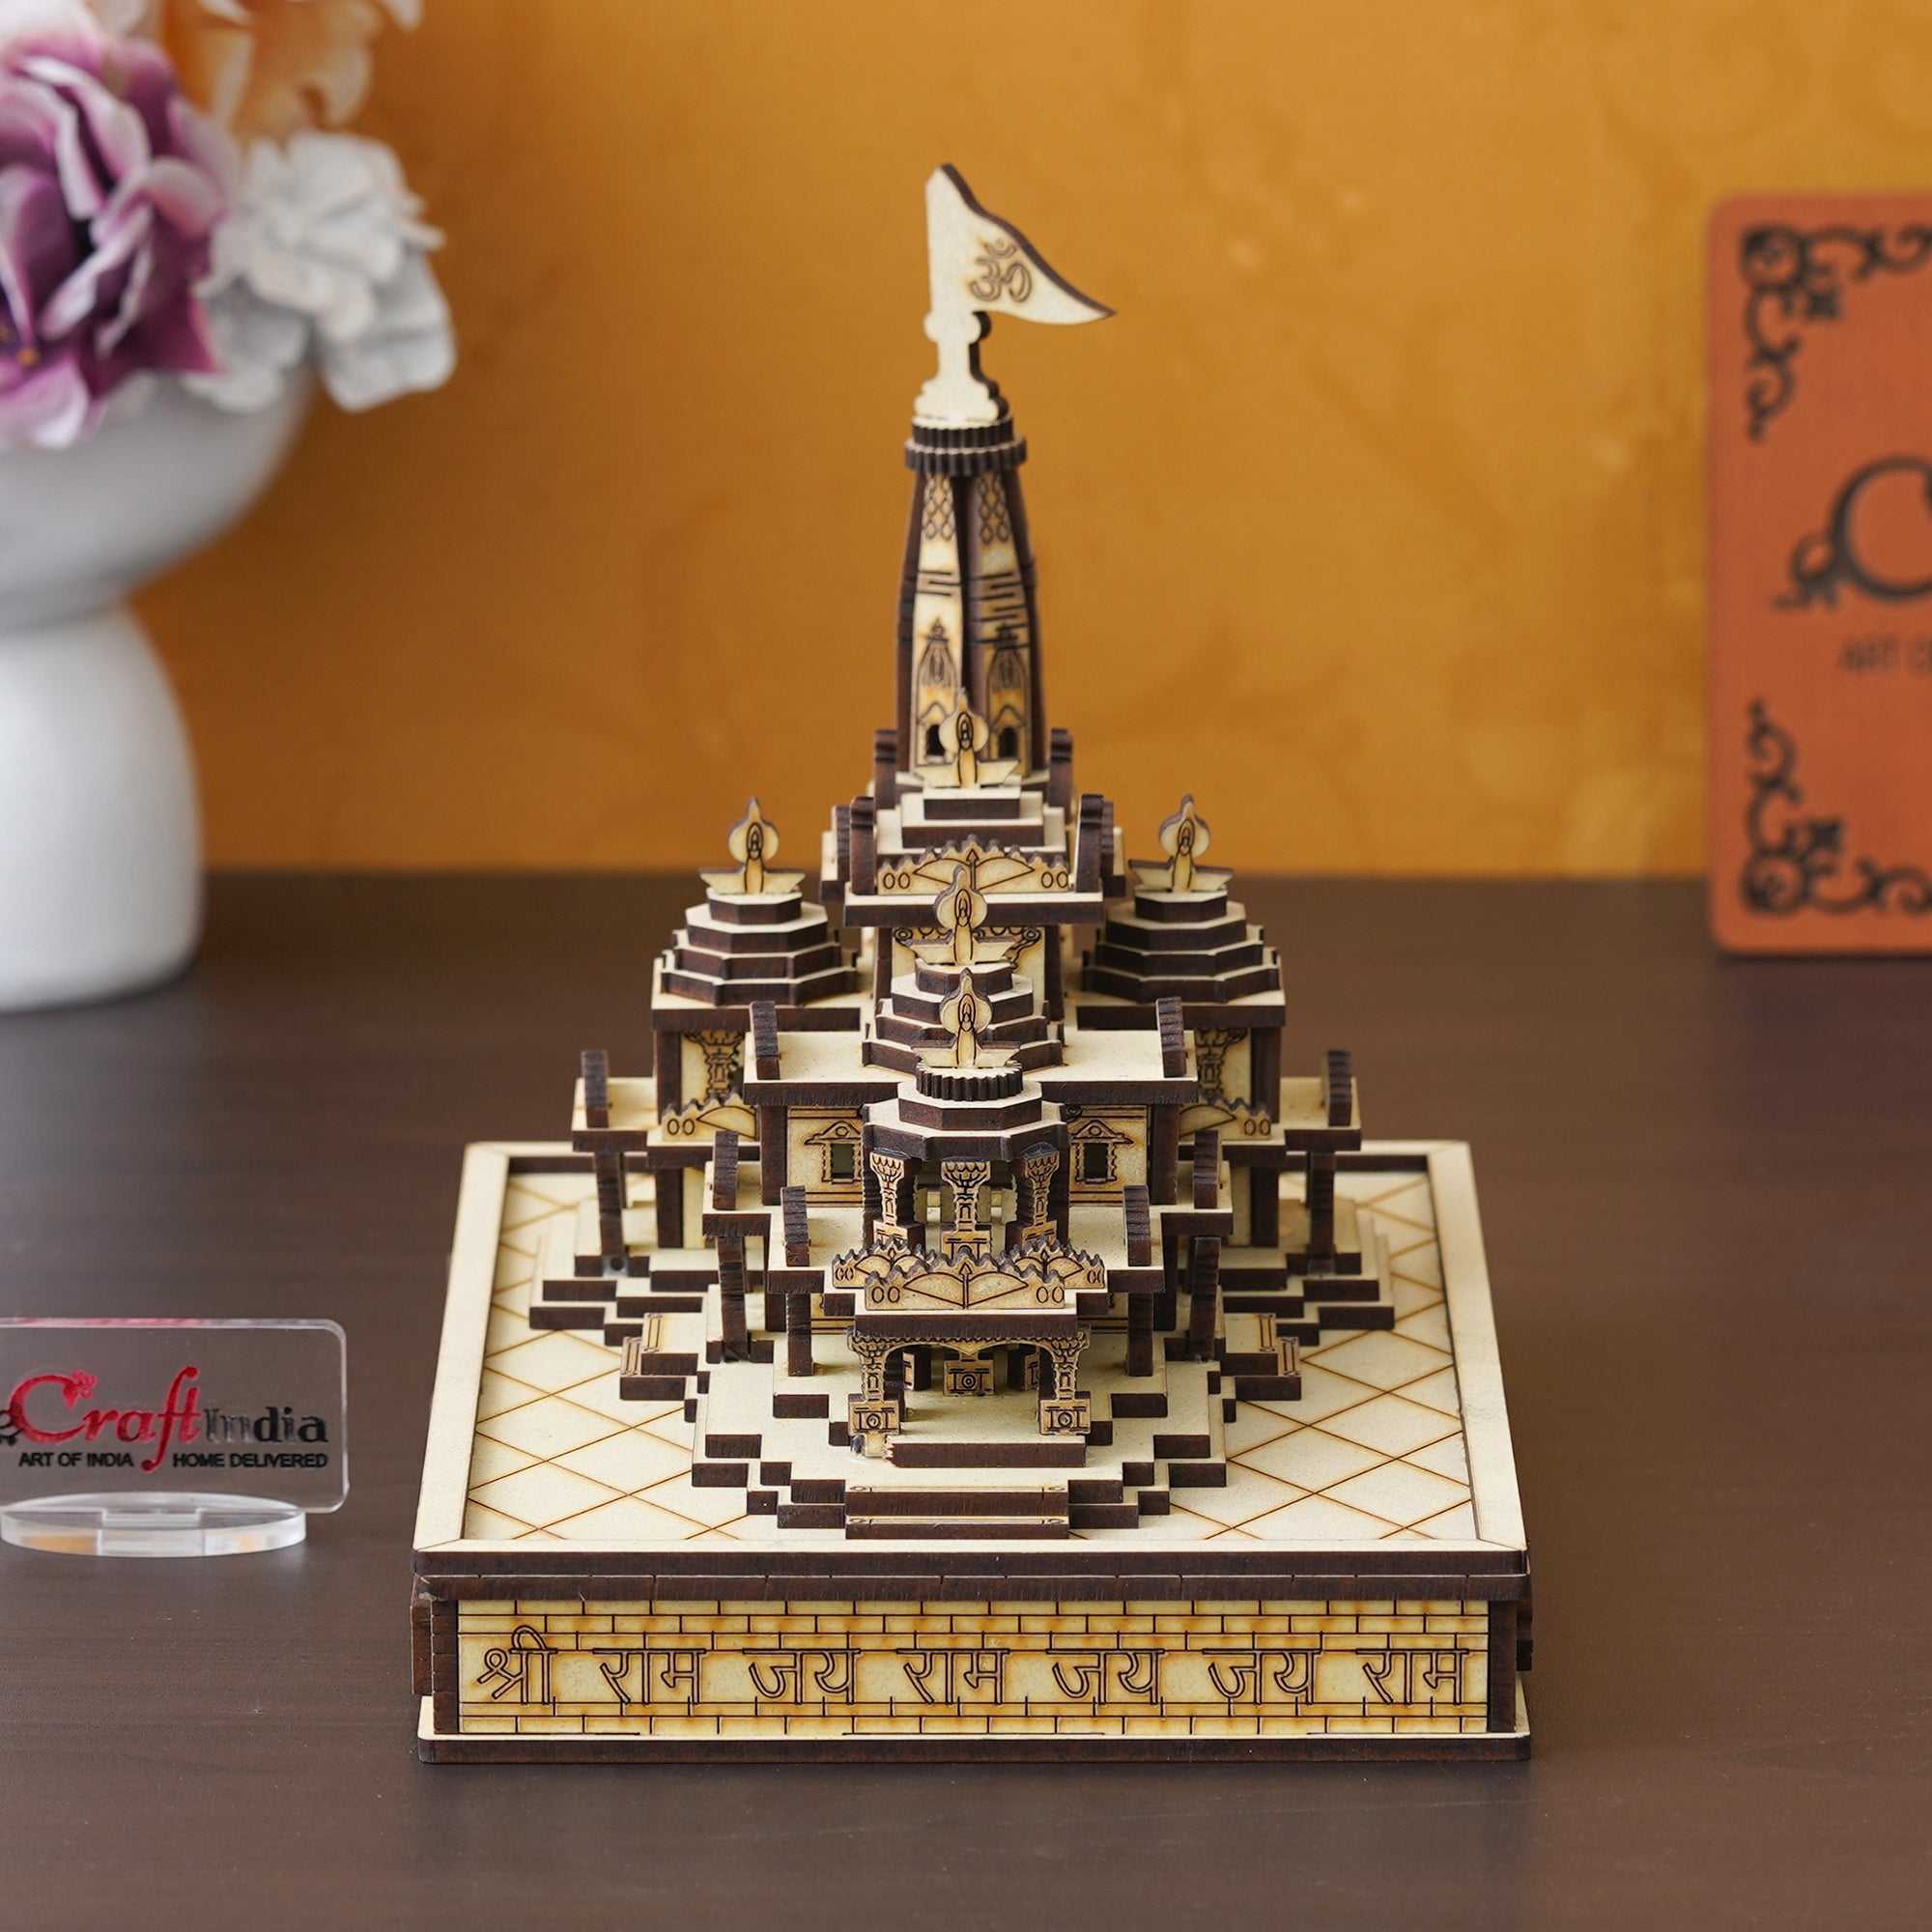 eCraftIndia Shri Ram Mandir Ayodhya Model with Light and Power Adapter - Wooden MDF Craftsmanship Authentic Designer Temple with Protective Gift Box - Ideal for Home Temple, Decor, and Spiritual Gifting 5